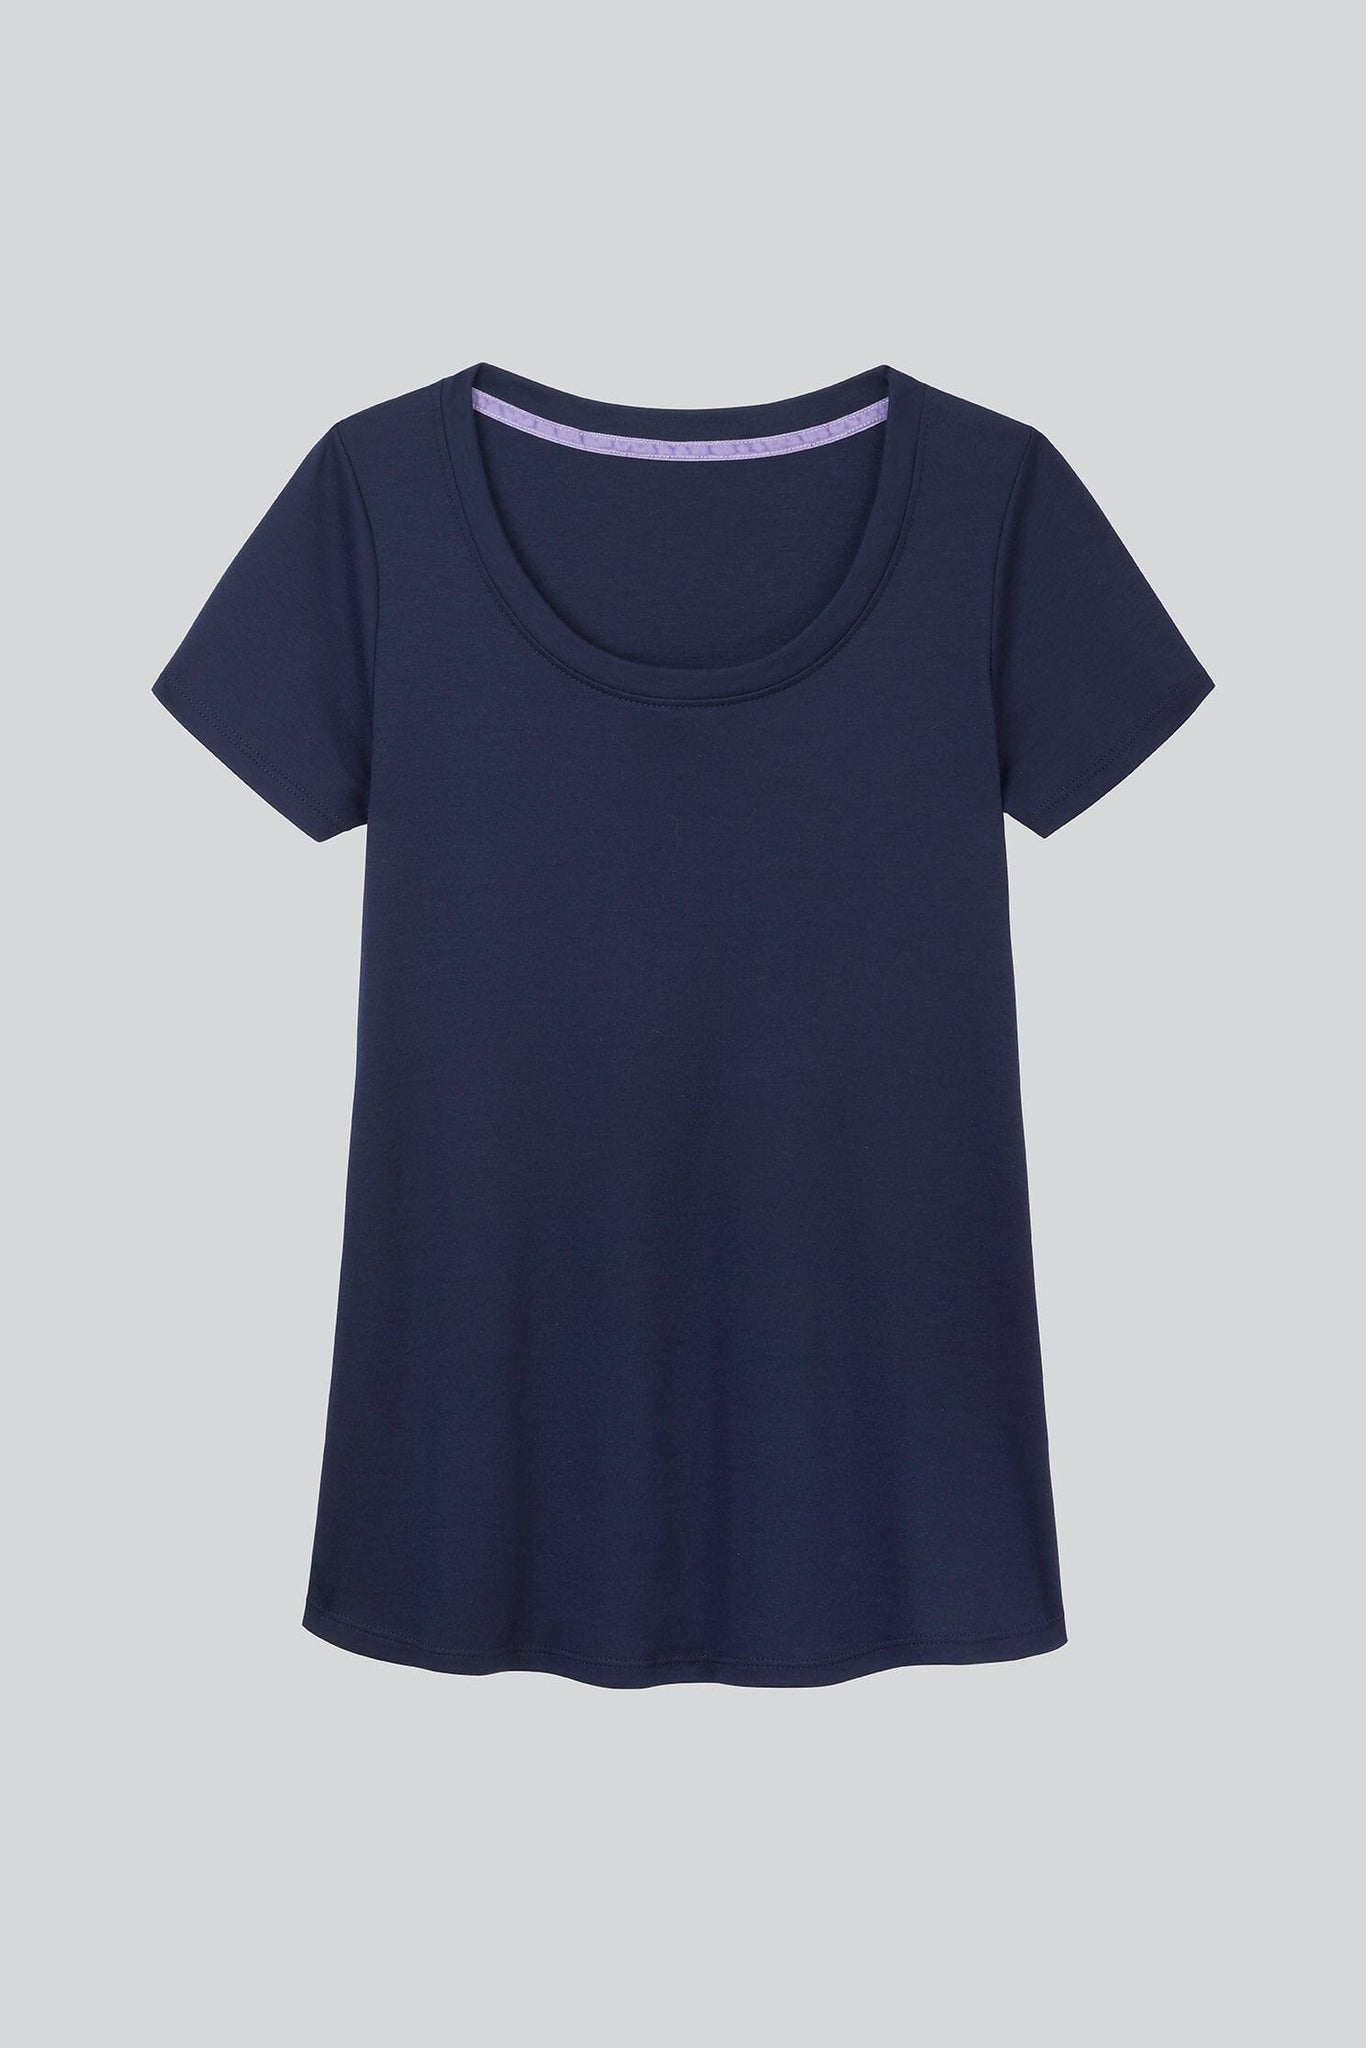 T Shirts for Women UK, White Tops for Women UK, Fall Tops, Ladies Short  Sleeve Jumpers, Beautician Uniform, Women Top, Top Women, Linen Shirts for  Women UK(S,Blue) : : Fashion